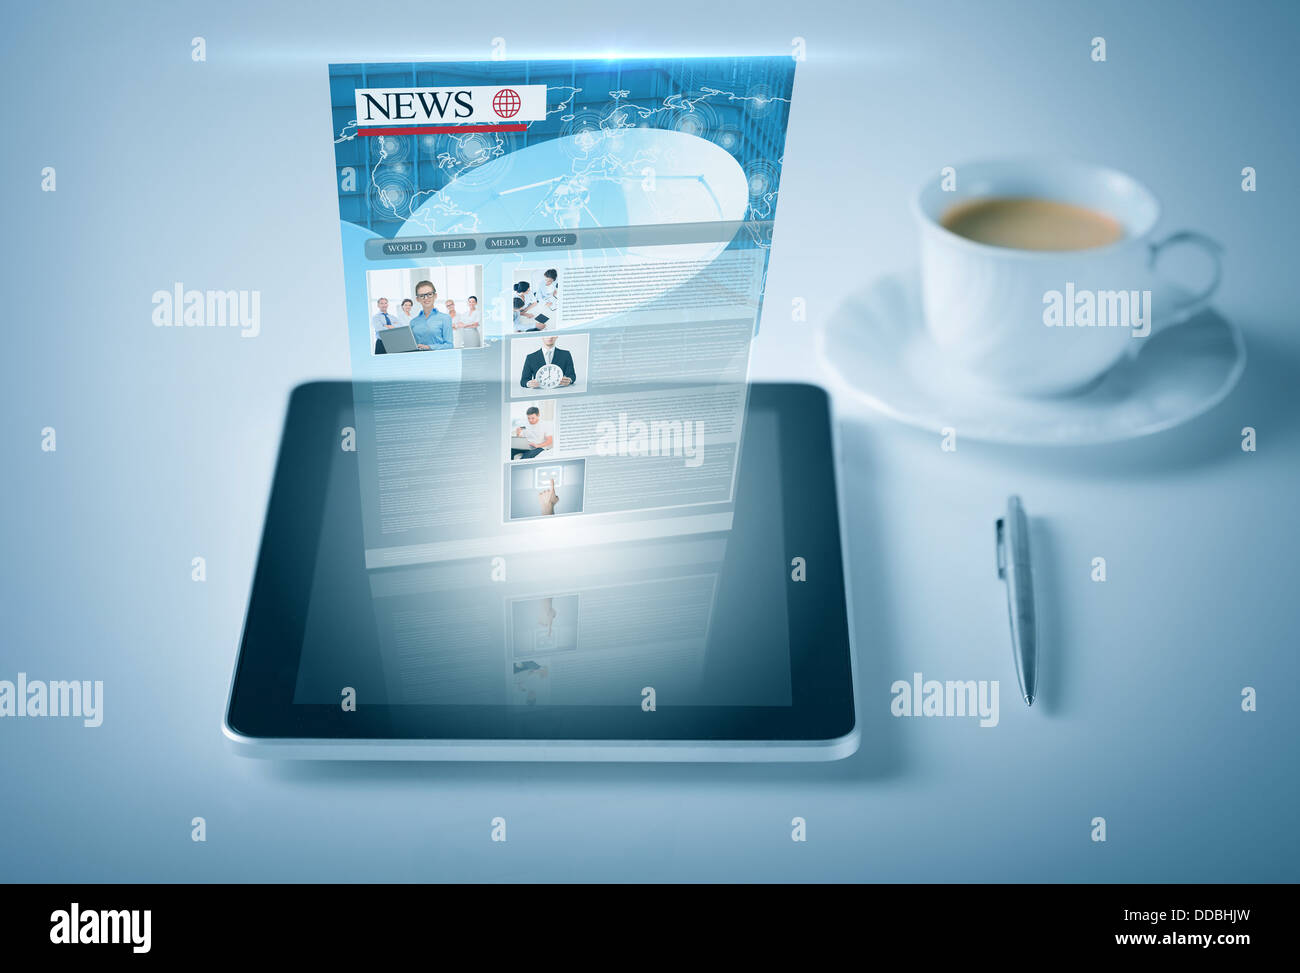 Tablet pc avec news feed Banque D'Images